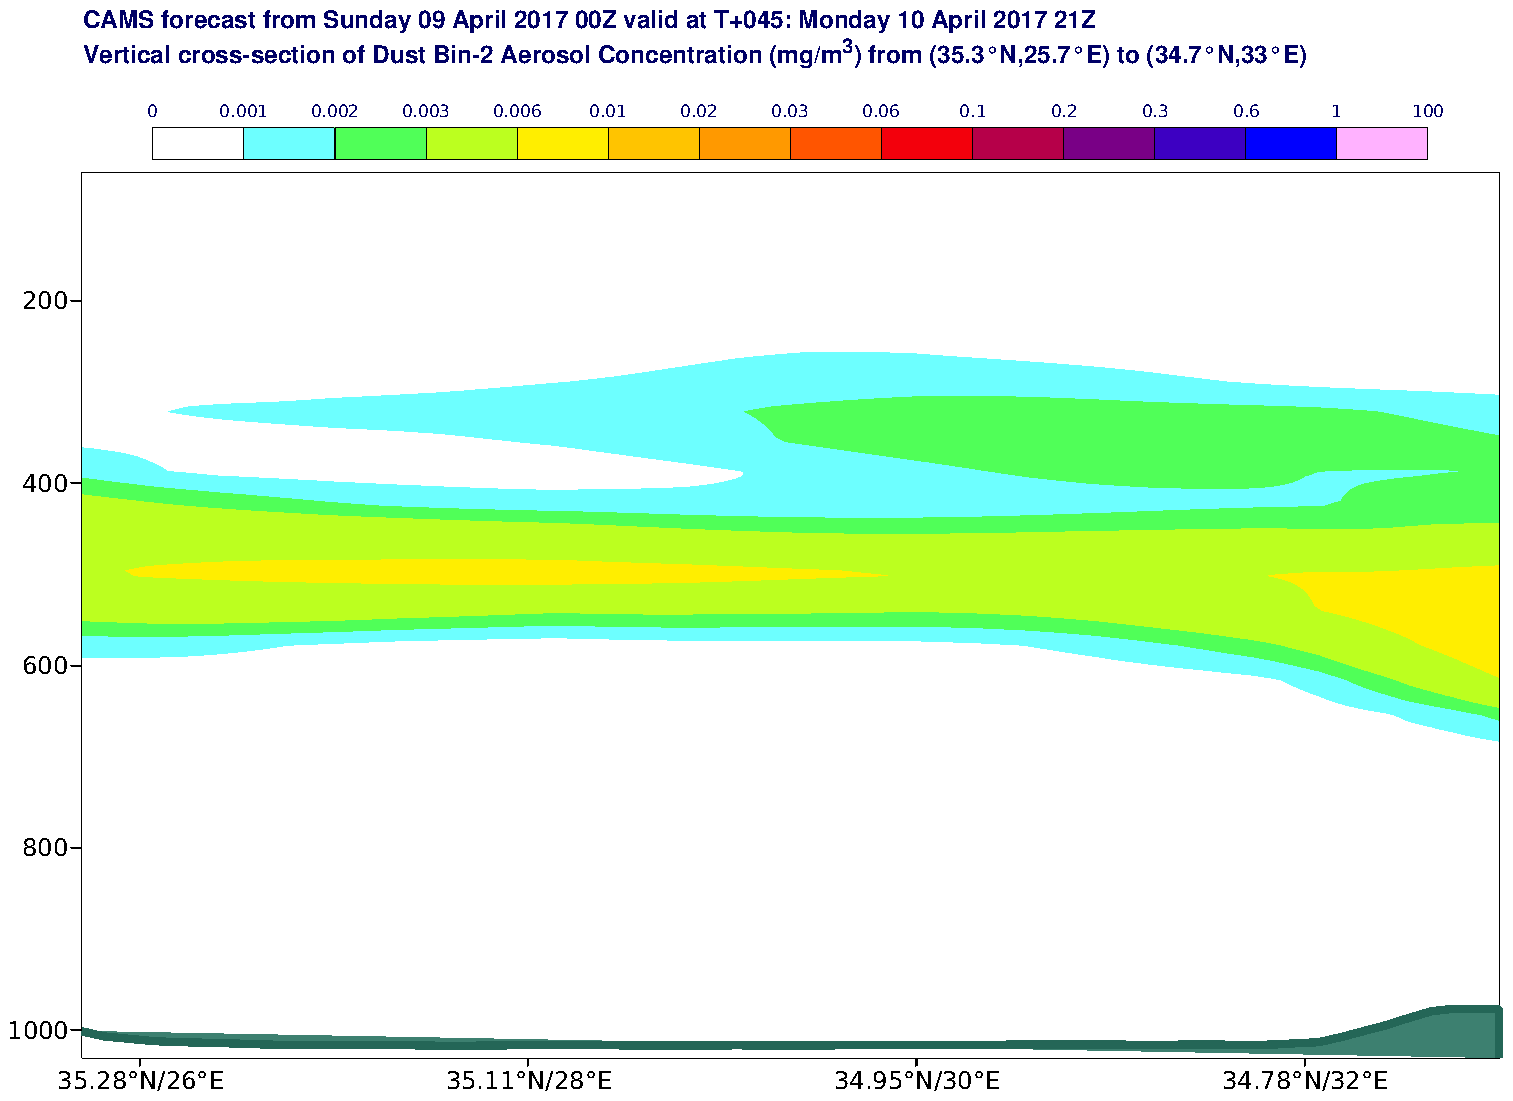 Vertical cross-section of Dust Bin-2 Aerosol Concentration (mg/m3) valid at T45 - 2017-04-10 21:00